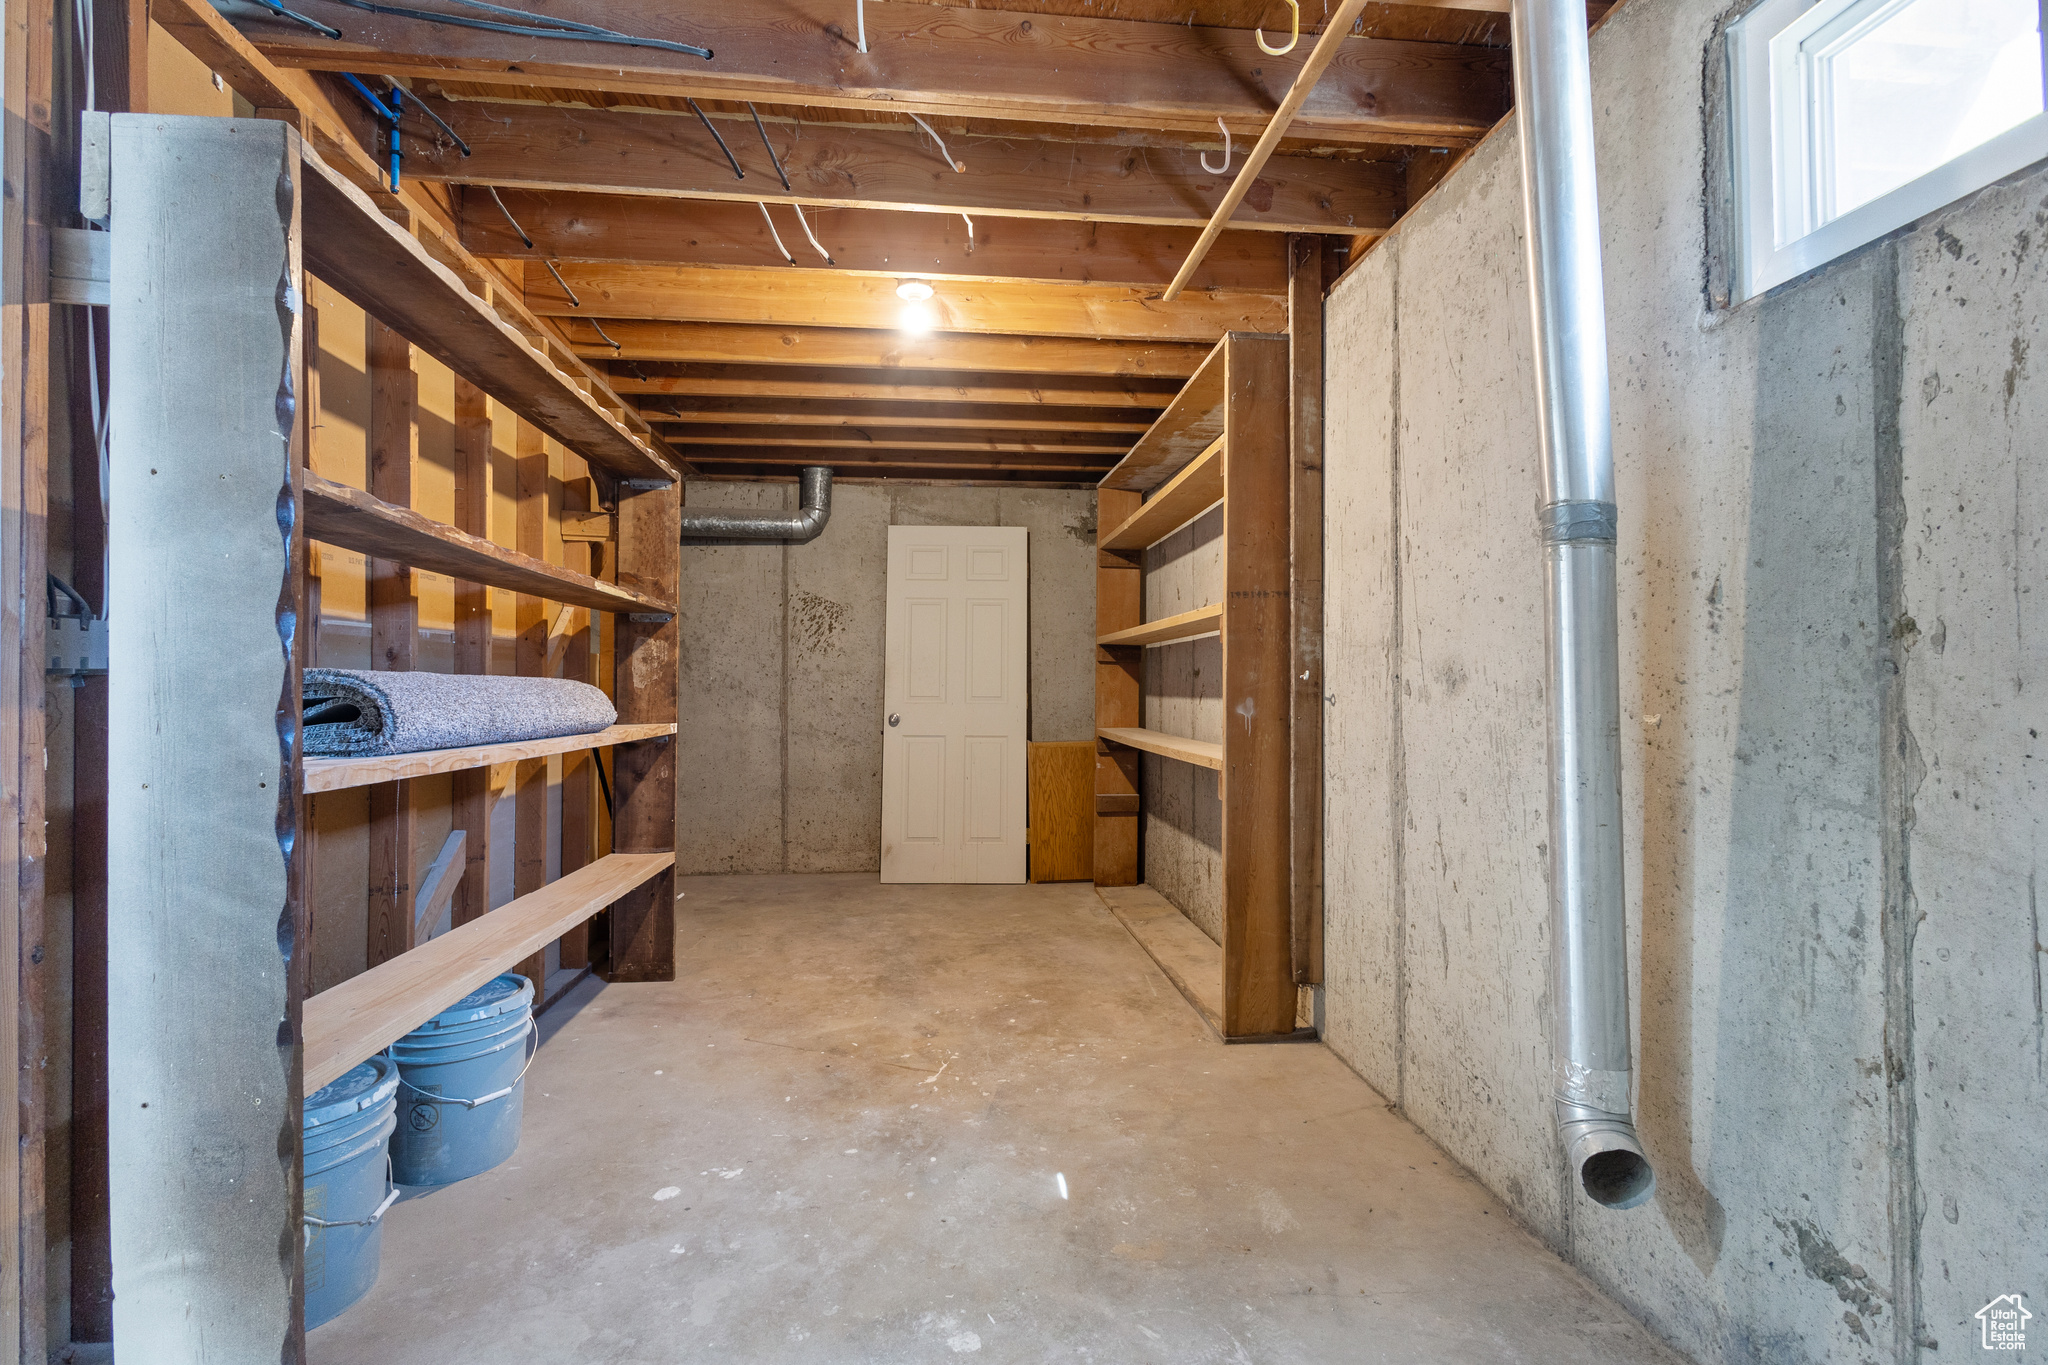 View of storage and laundry room